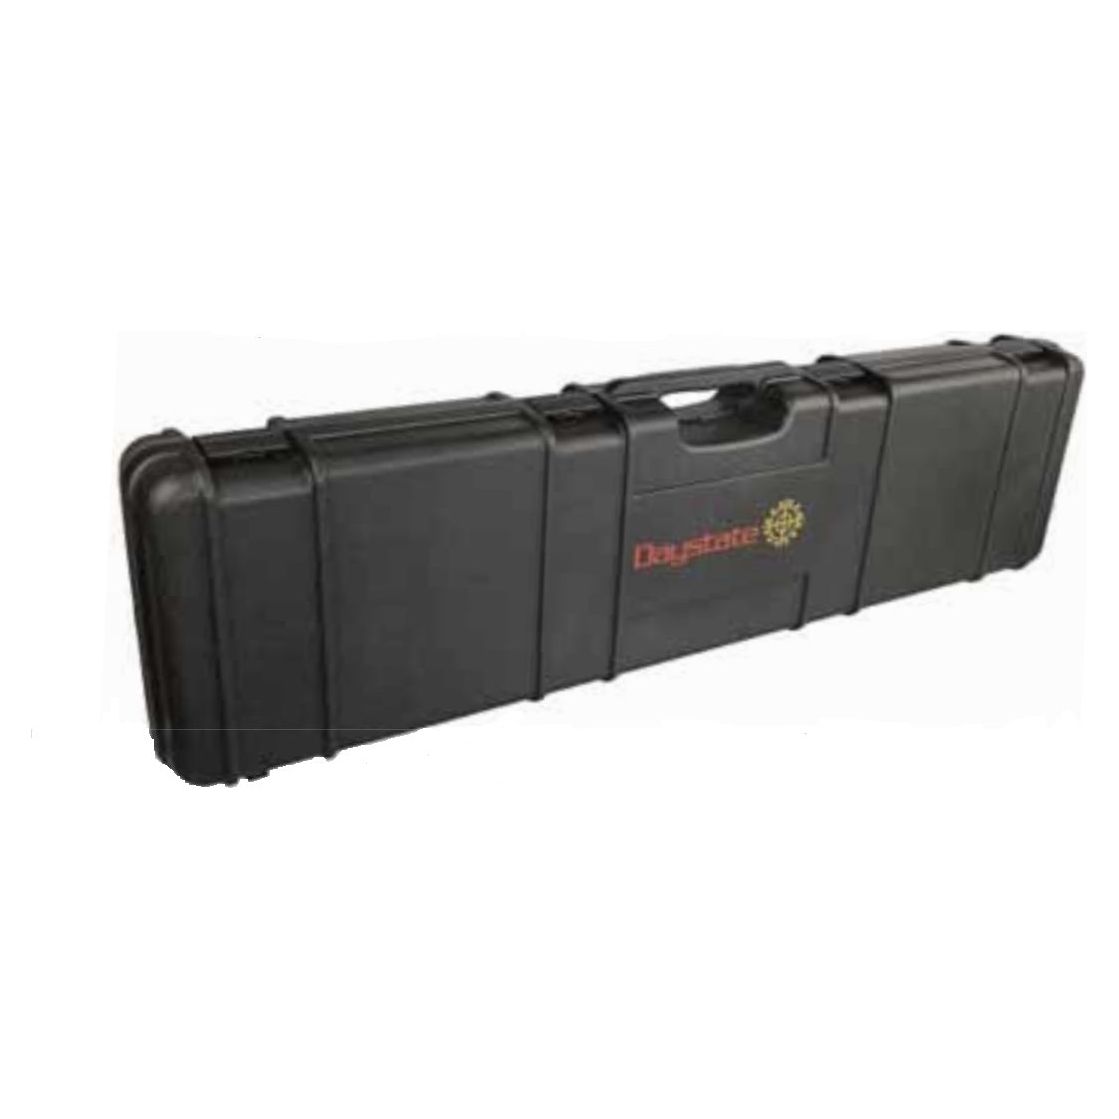 Daystate Hard Case from Sunderland Scuba and Shooting